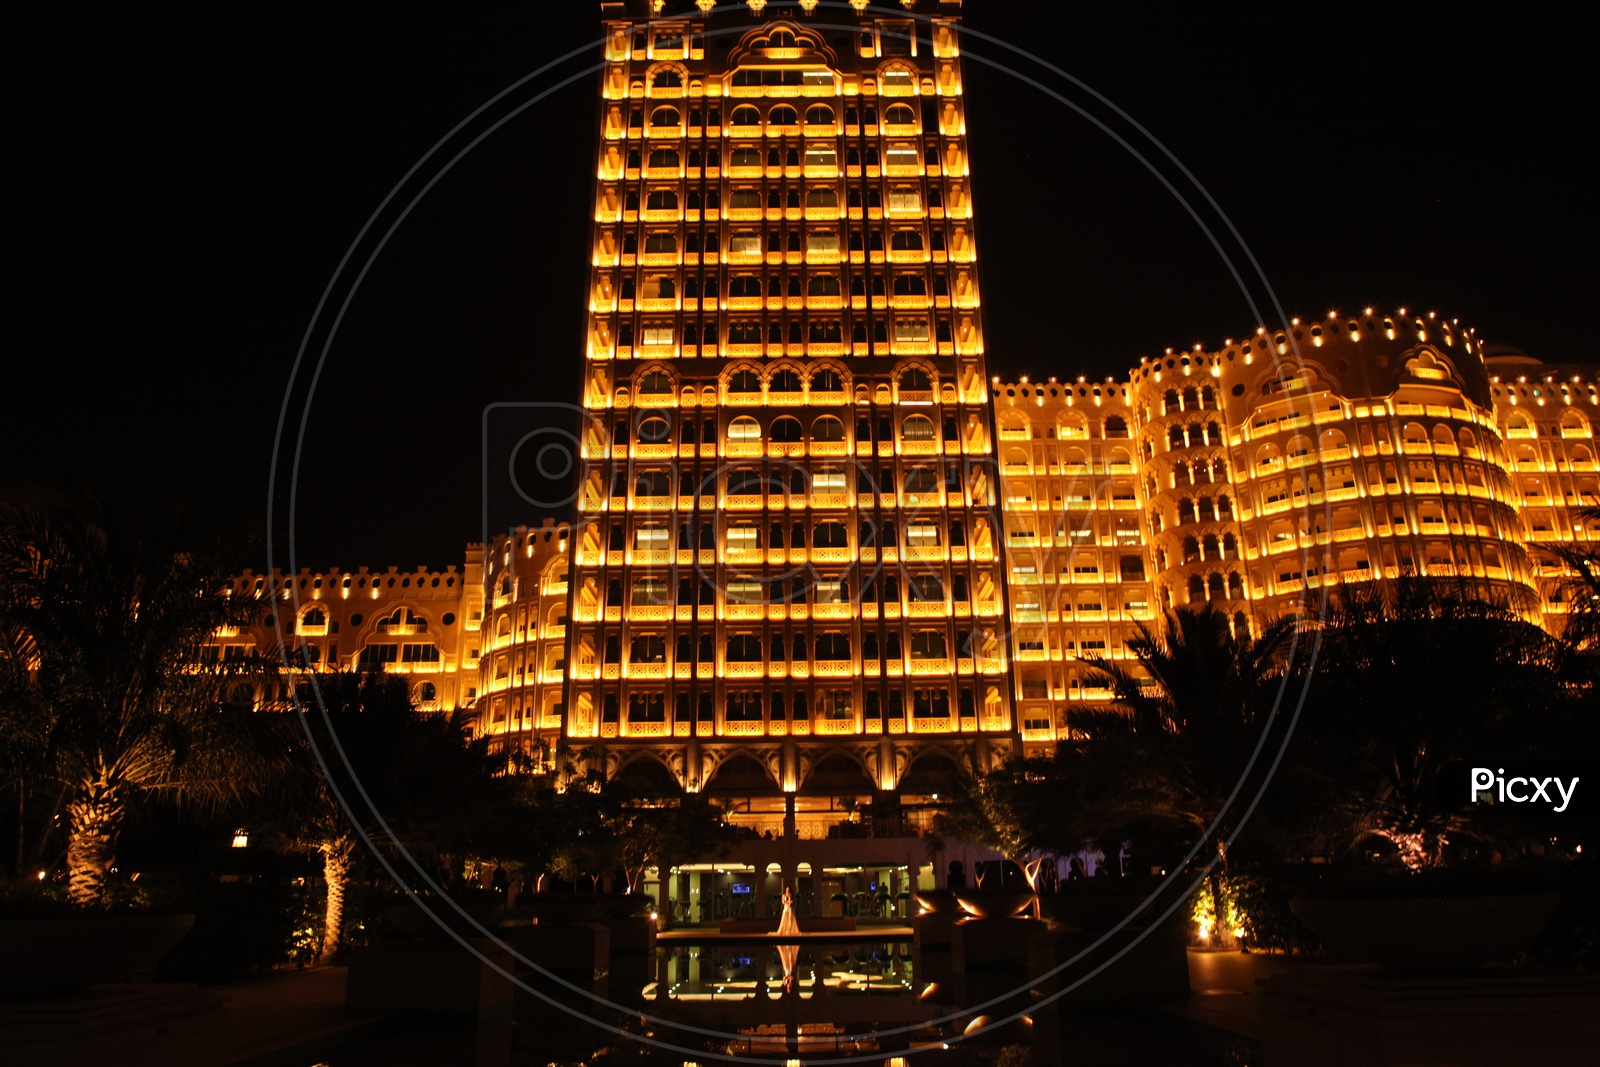 A Building Facade With Gold Luminous Lights